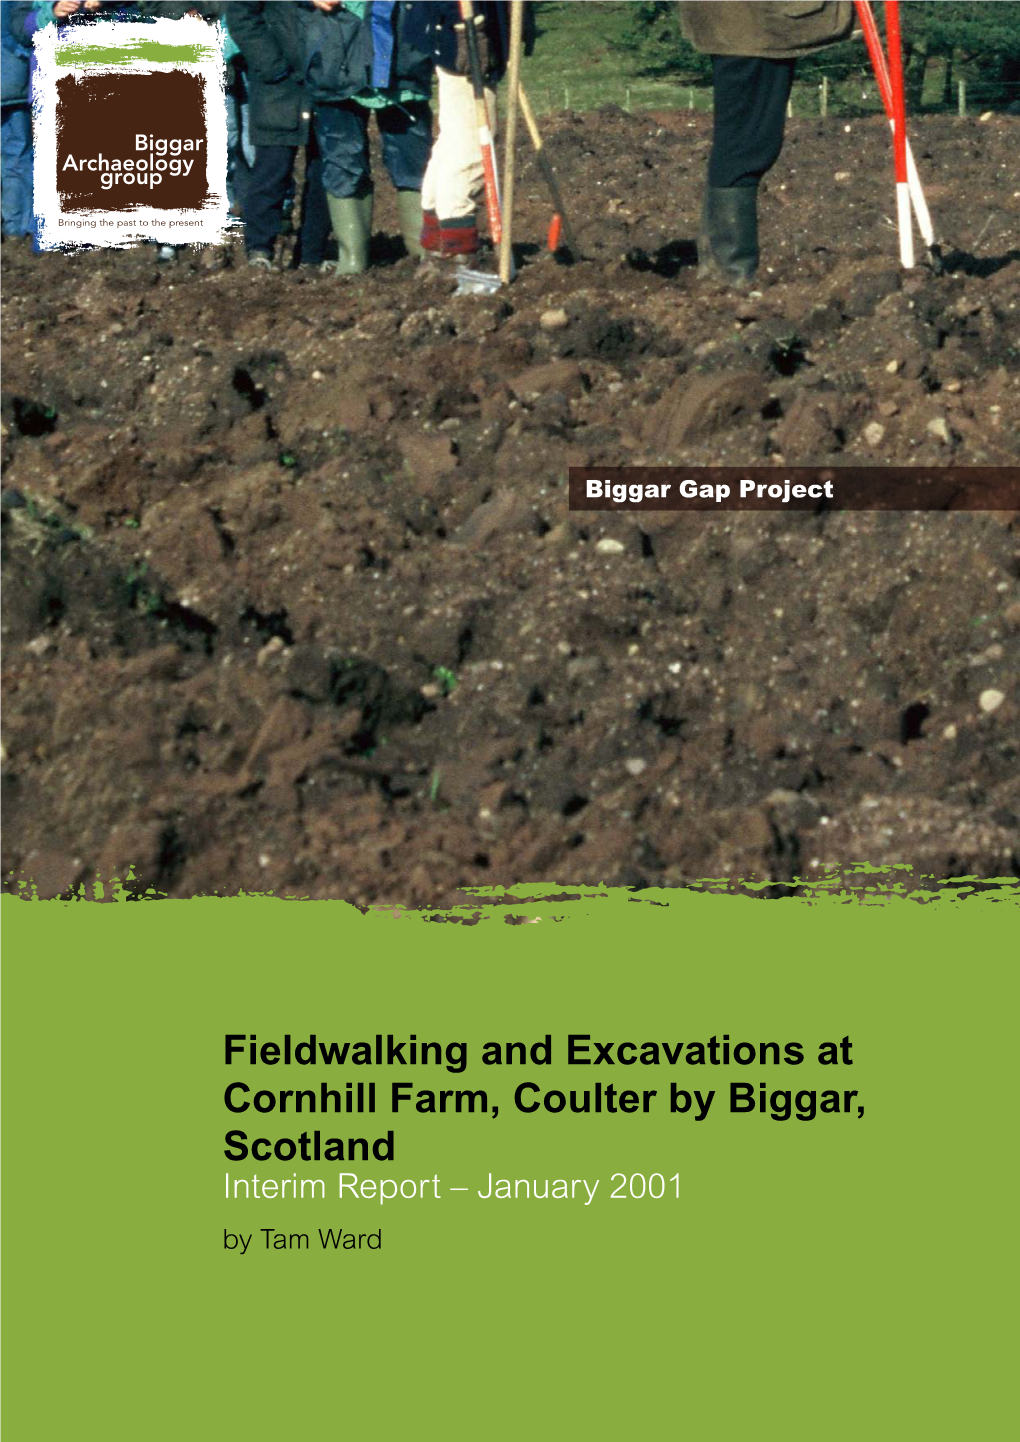 Fieldwalking and Excavations at Cornhill Farm, Coulter by Biggar, Scotland Interim Report – January 2001 by Tam Ward